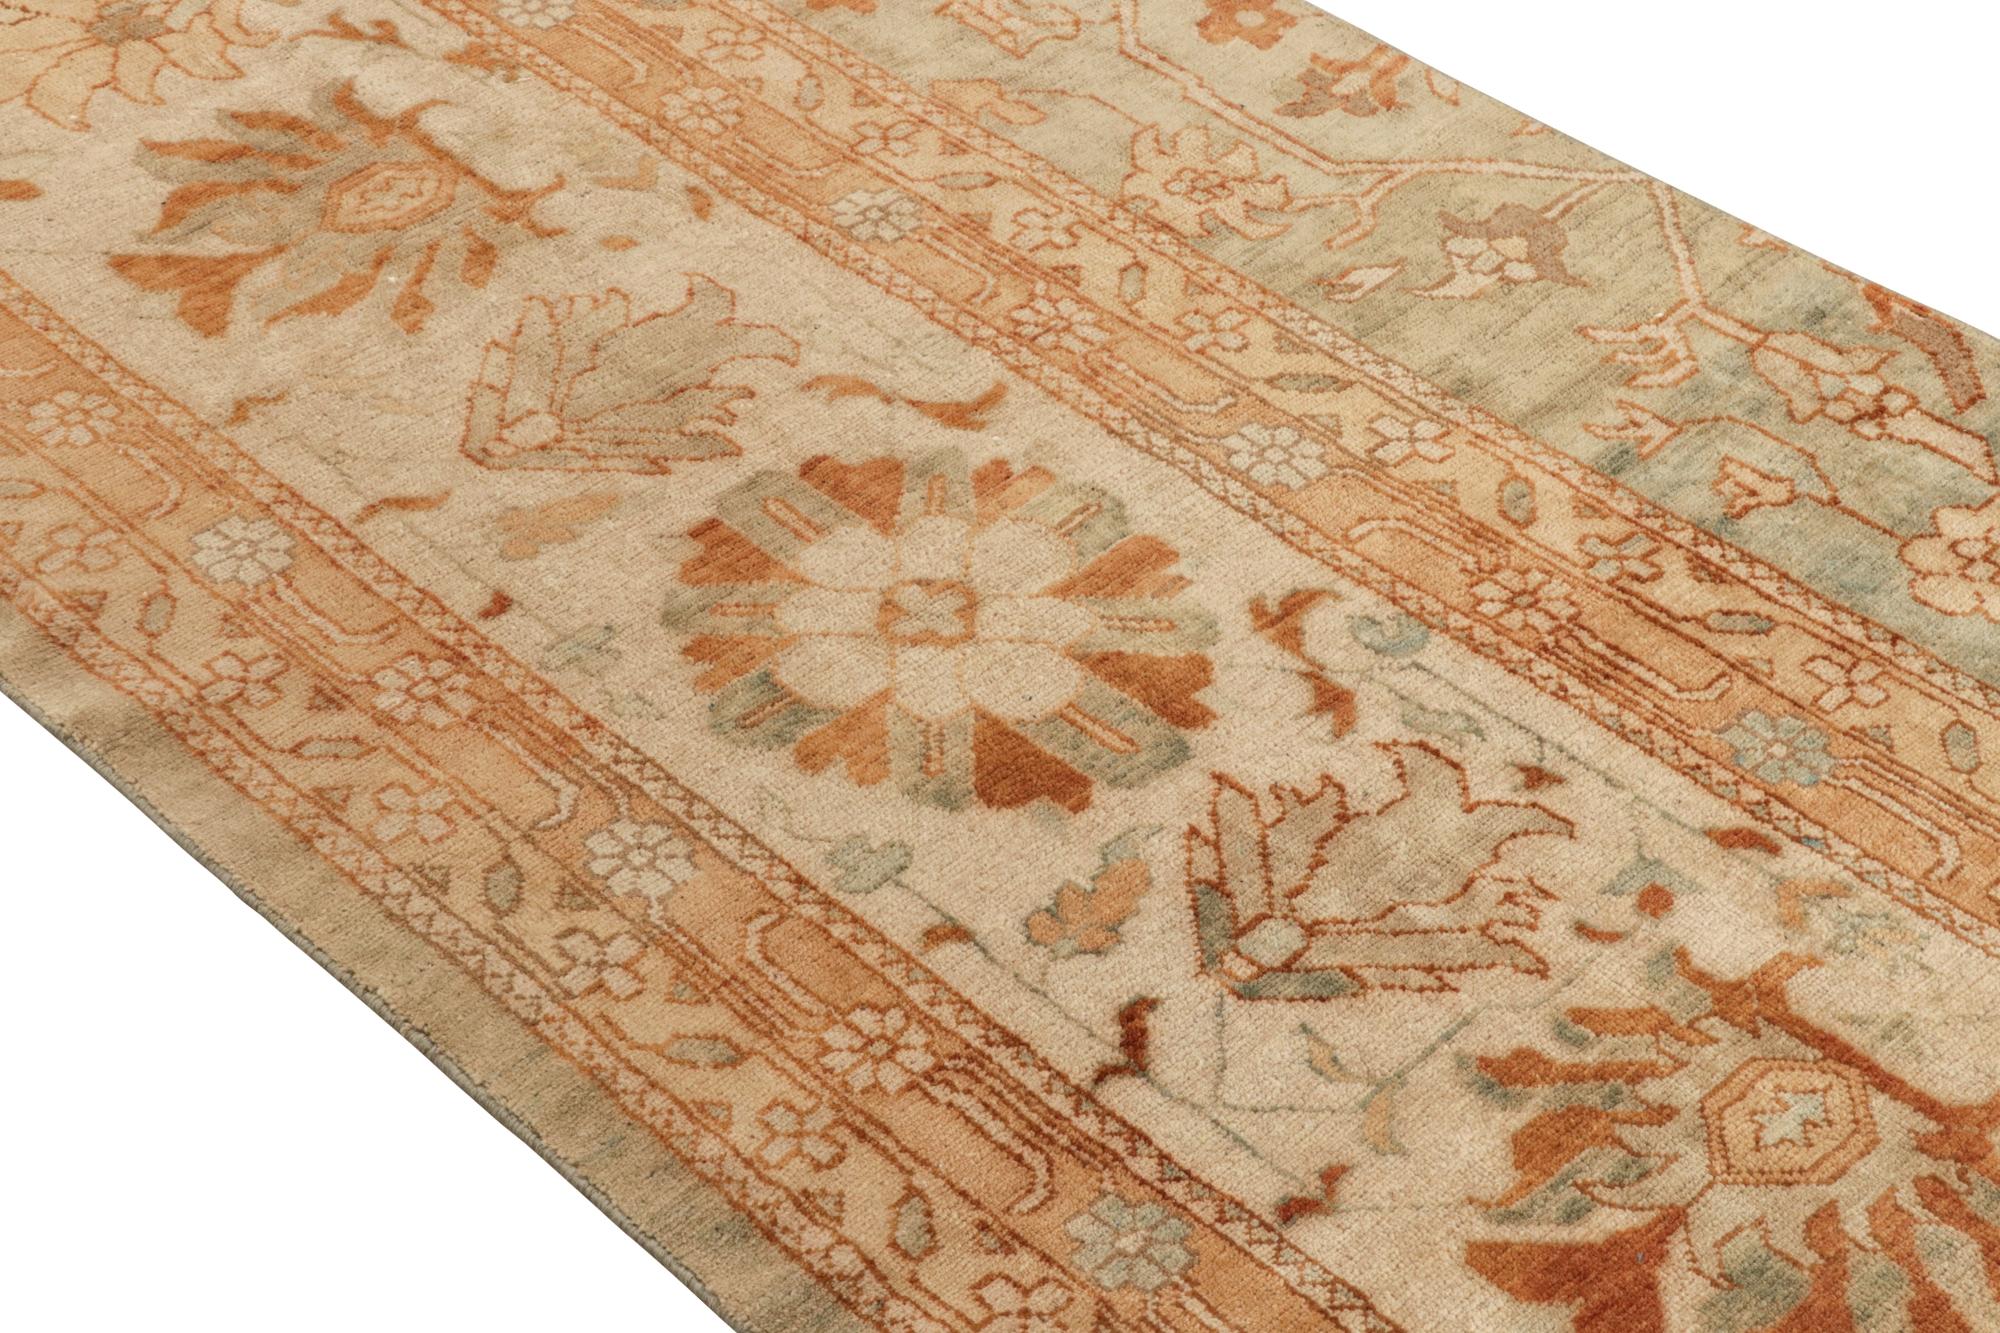 A 4x22 extra long runner sampler inspired by Sultanabad Persian rugs—from Rug & Kilim’s Modern Classics Collection. Hand-knotted in wool, playing a confluence of warm tones in floral patterns with classic grace.

Further On the Design:

The play